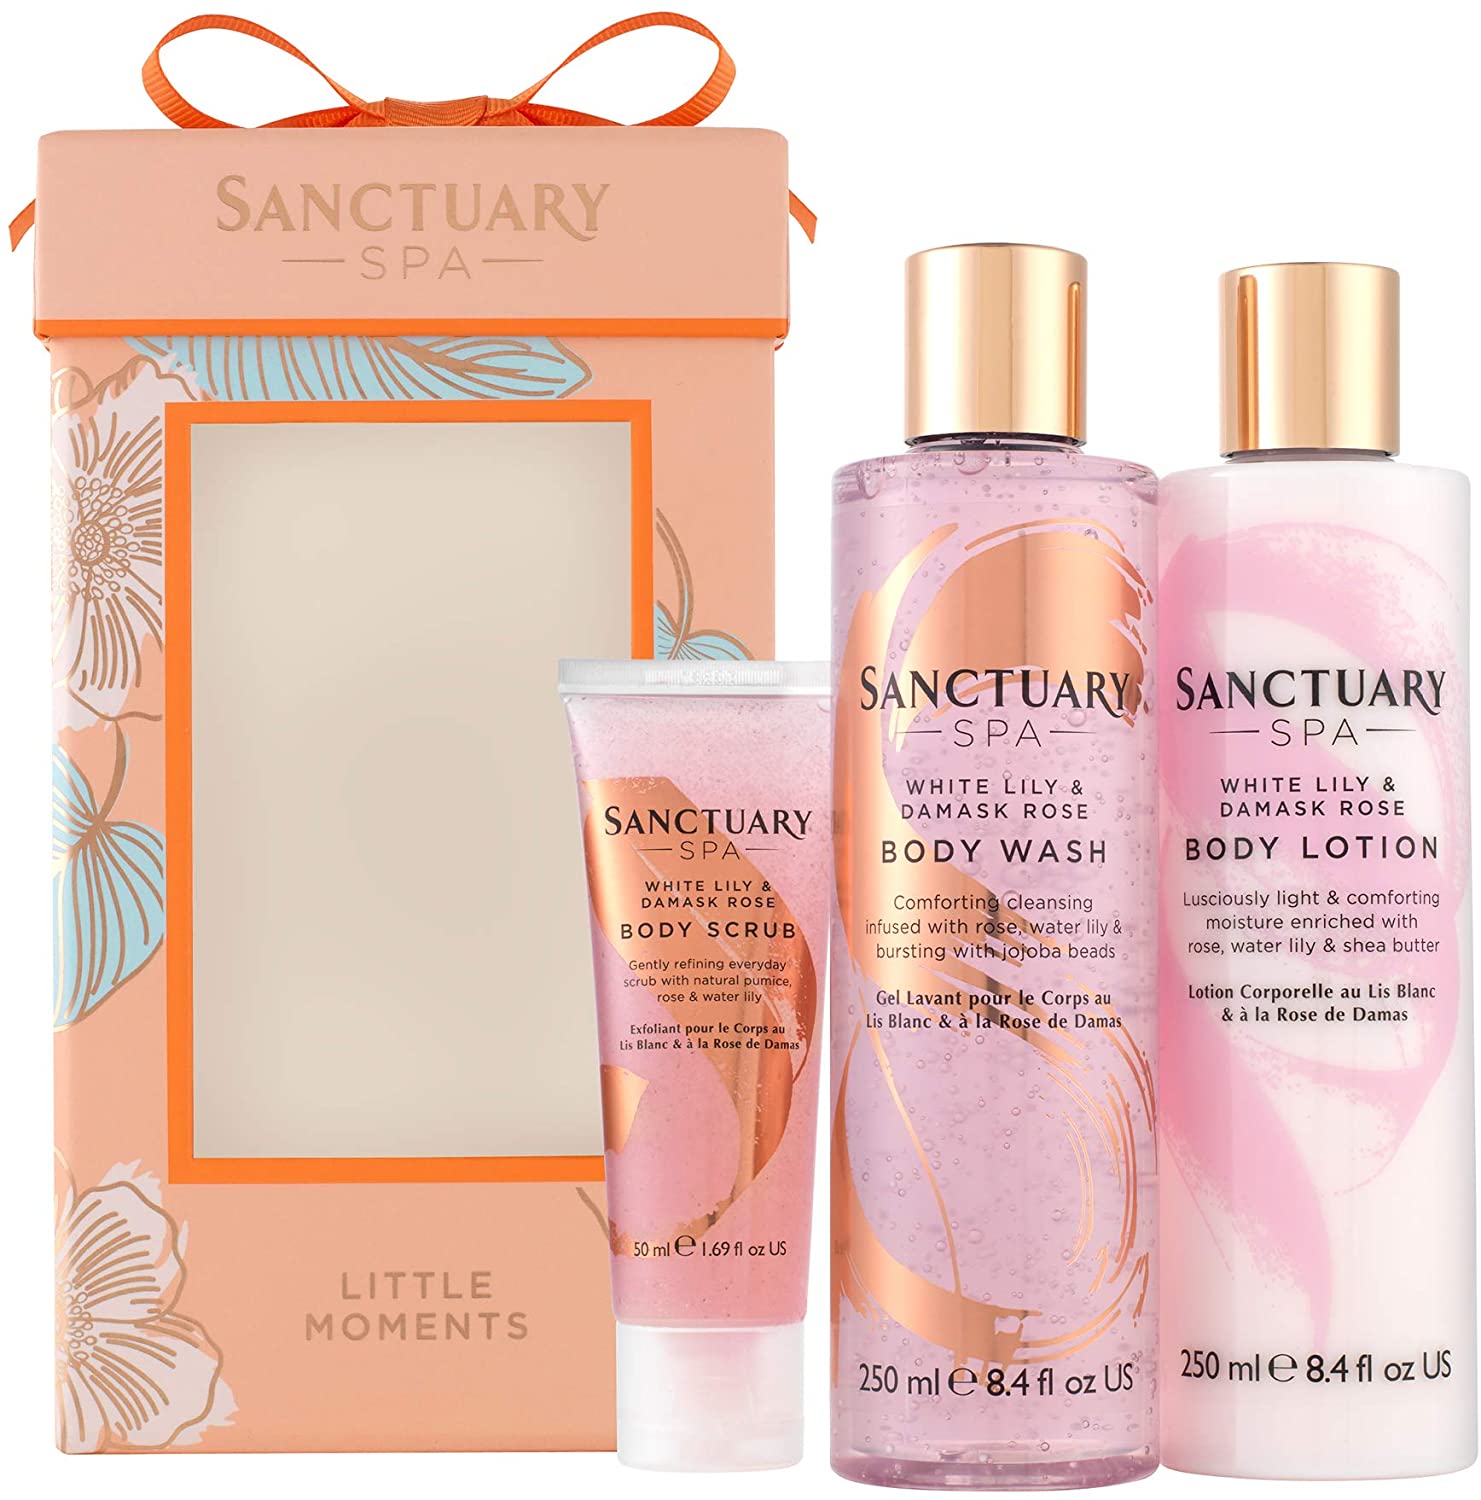 Sanctuary Spa Gift Set, Little Moments White Lily and